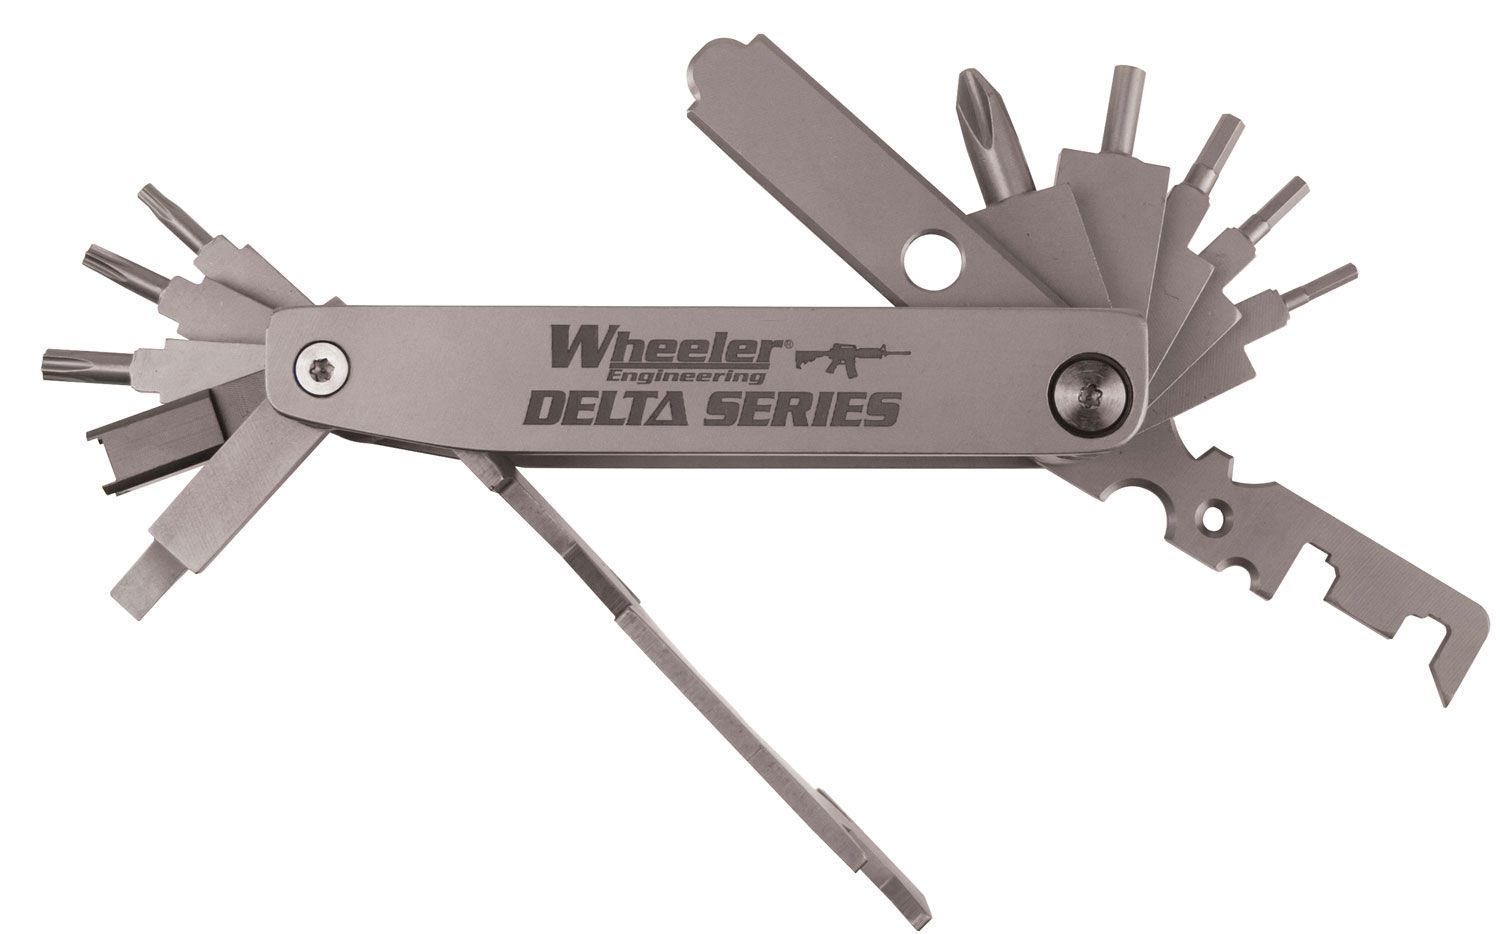 WHEELER AR MULTI-TOOL COMPACT WITH CARRY CASE